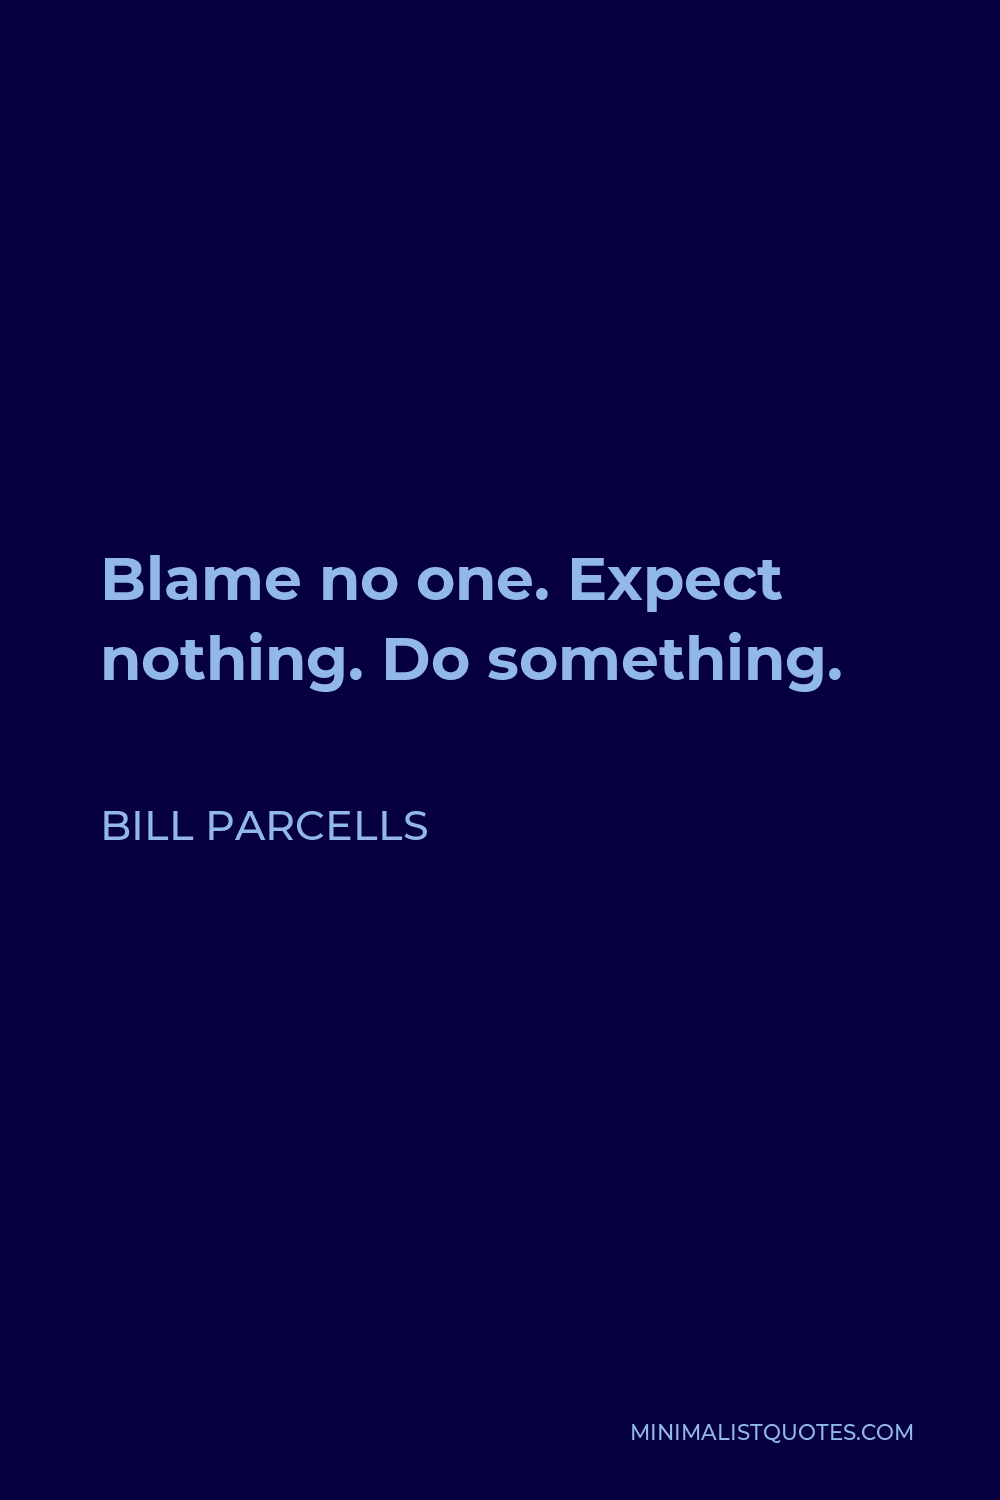 Bill Parcells Quote - Blame no one. Expect nothing. Do something.